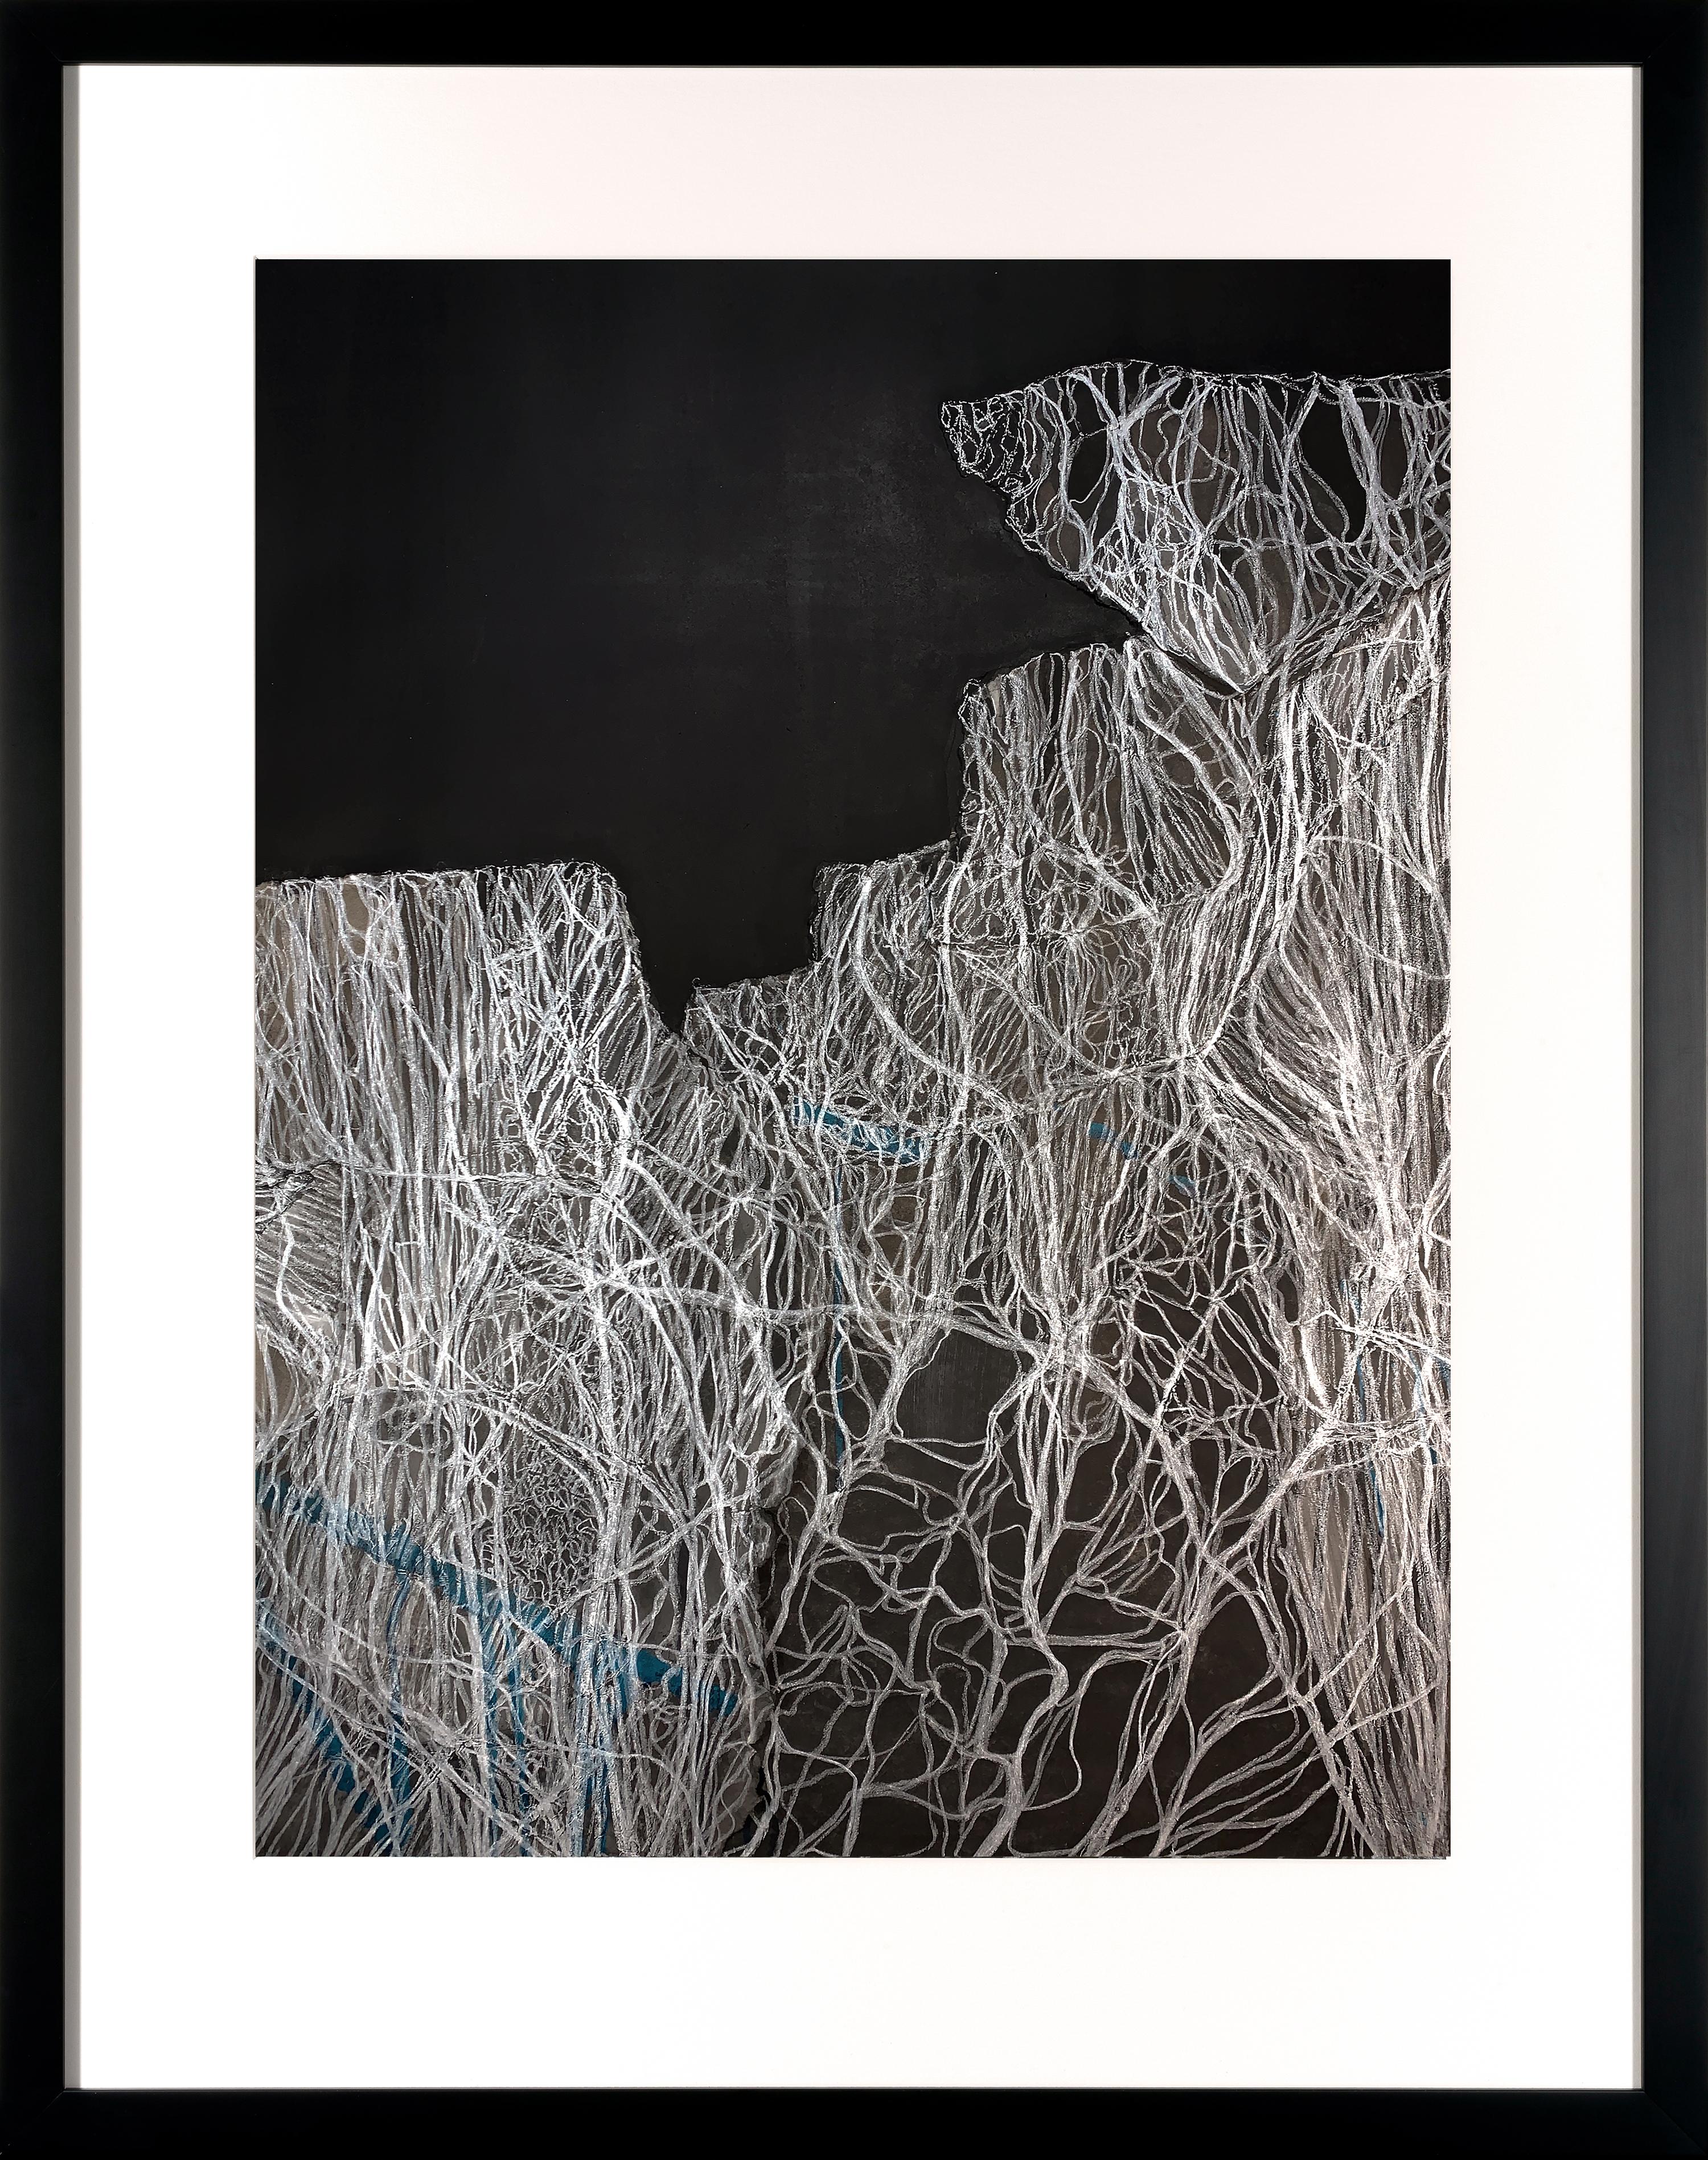 Katherine Filice Abstract Drawing - Fragments of Memory III - Contemporary Abstract Work on Paper Black, White Teal